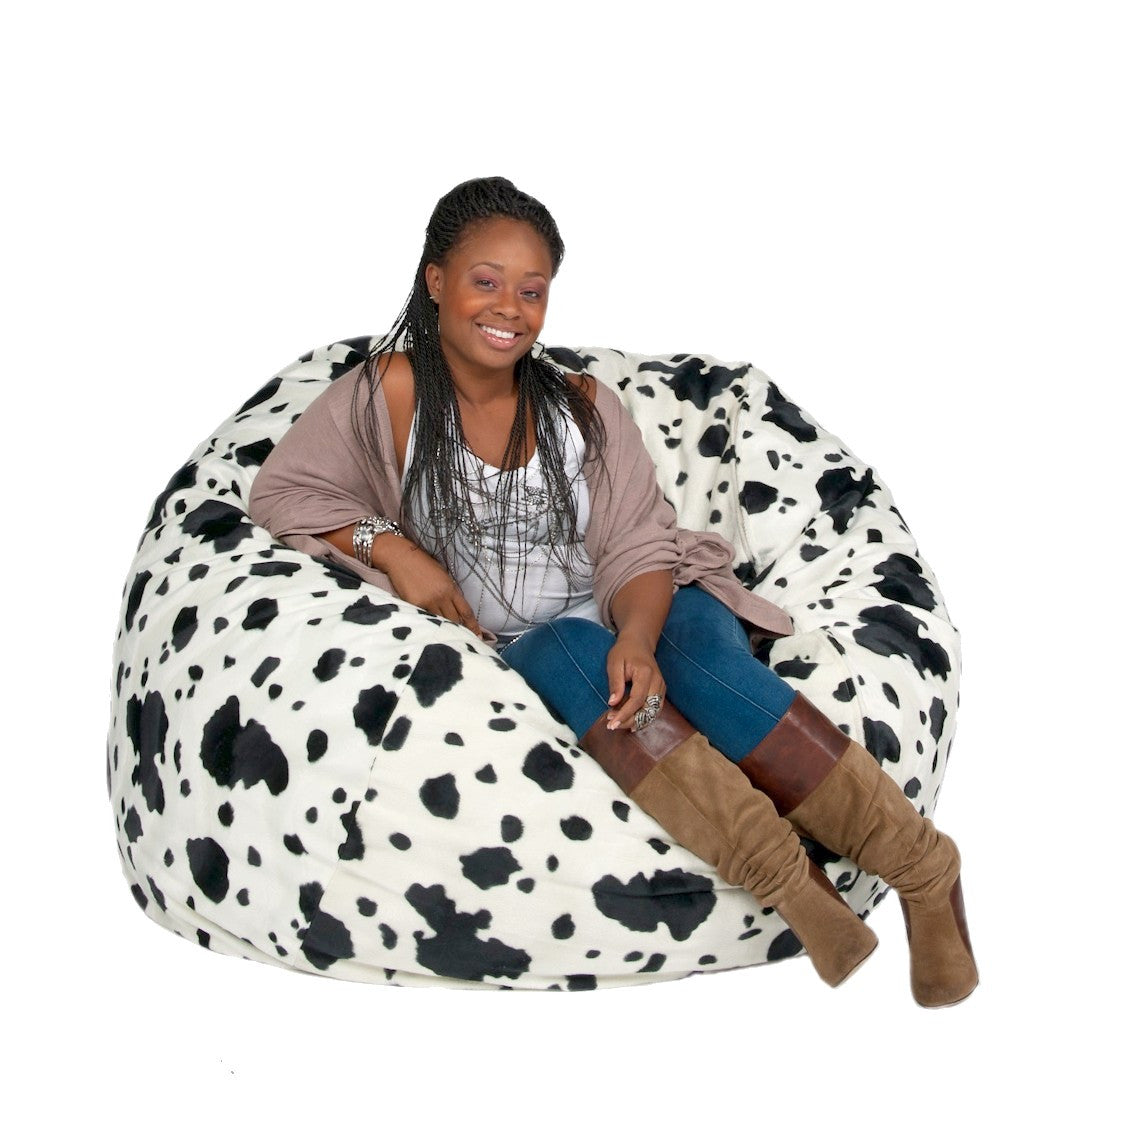 Foam Bag Chairs - Bean Bag Chairs - Chairs Filled With Foam